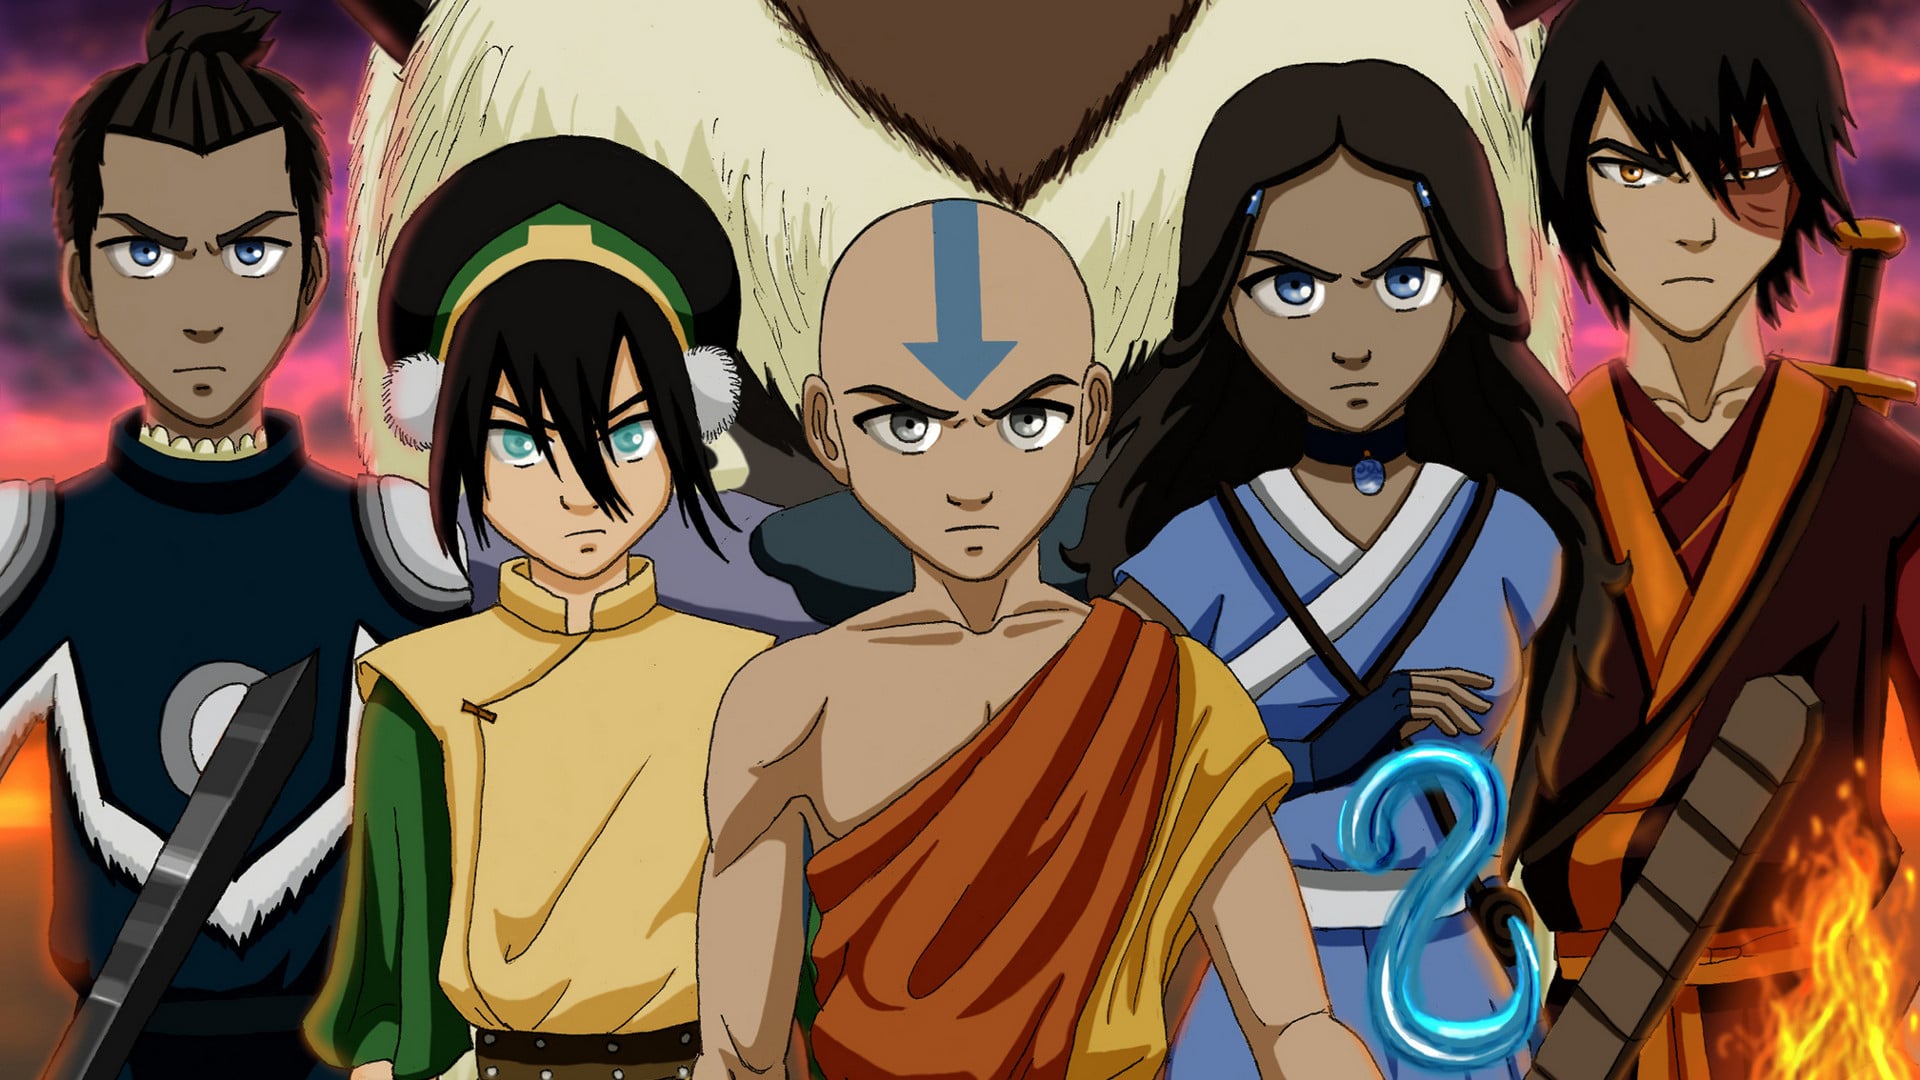 New Avatar The Last Airbender Live Action Series Searching for Diverse Talent